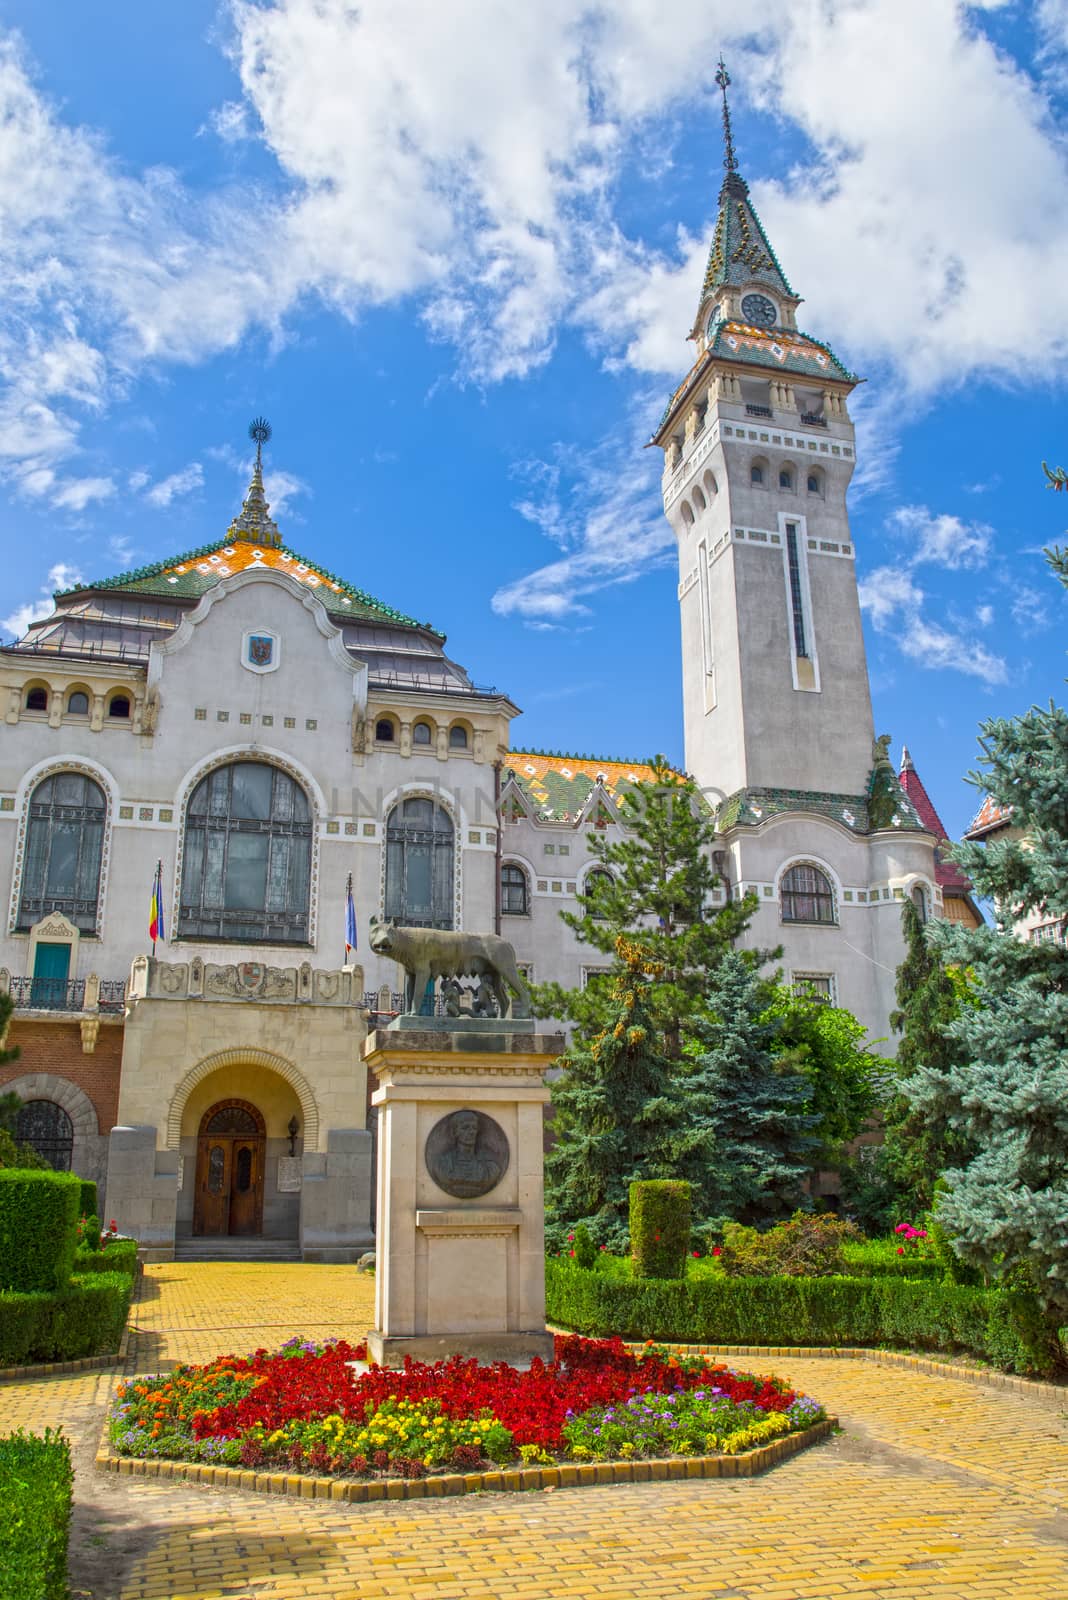 The Administrative Palace of Targu Mures. The statue is a replica of Capitoline Wolf.